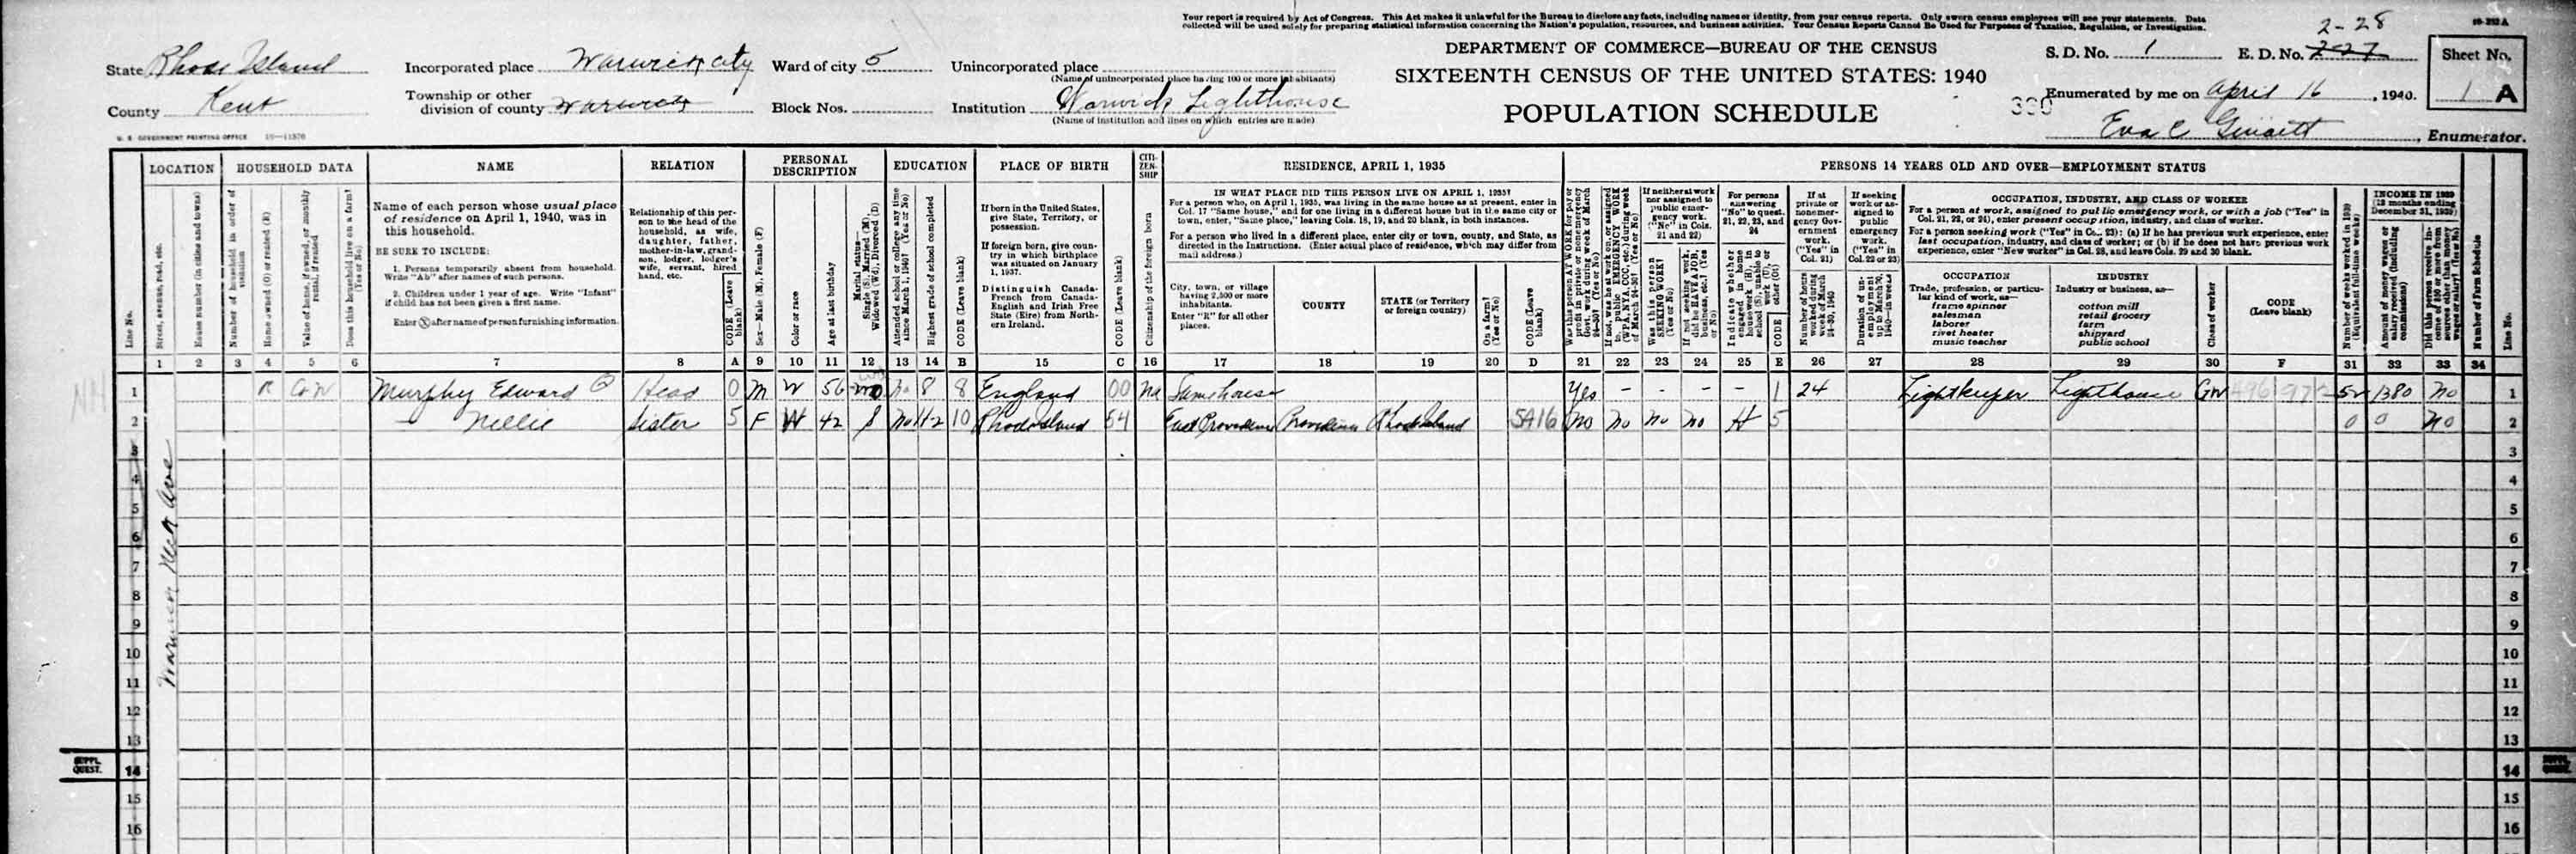 Watch Lighthouse 1940 Census